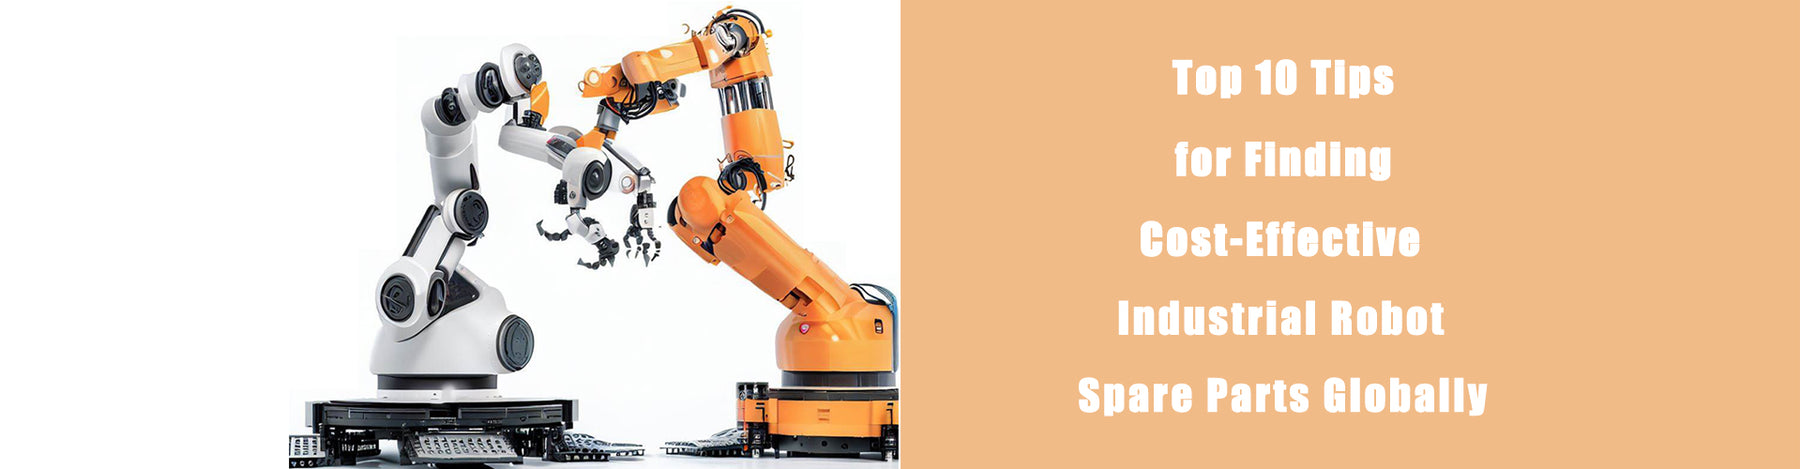 Top 10 Tips for Finding Cost-Effective Industrial Robot Spare Parts Globally